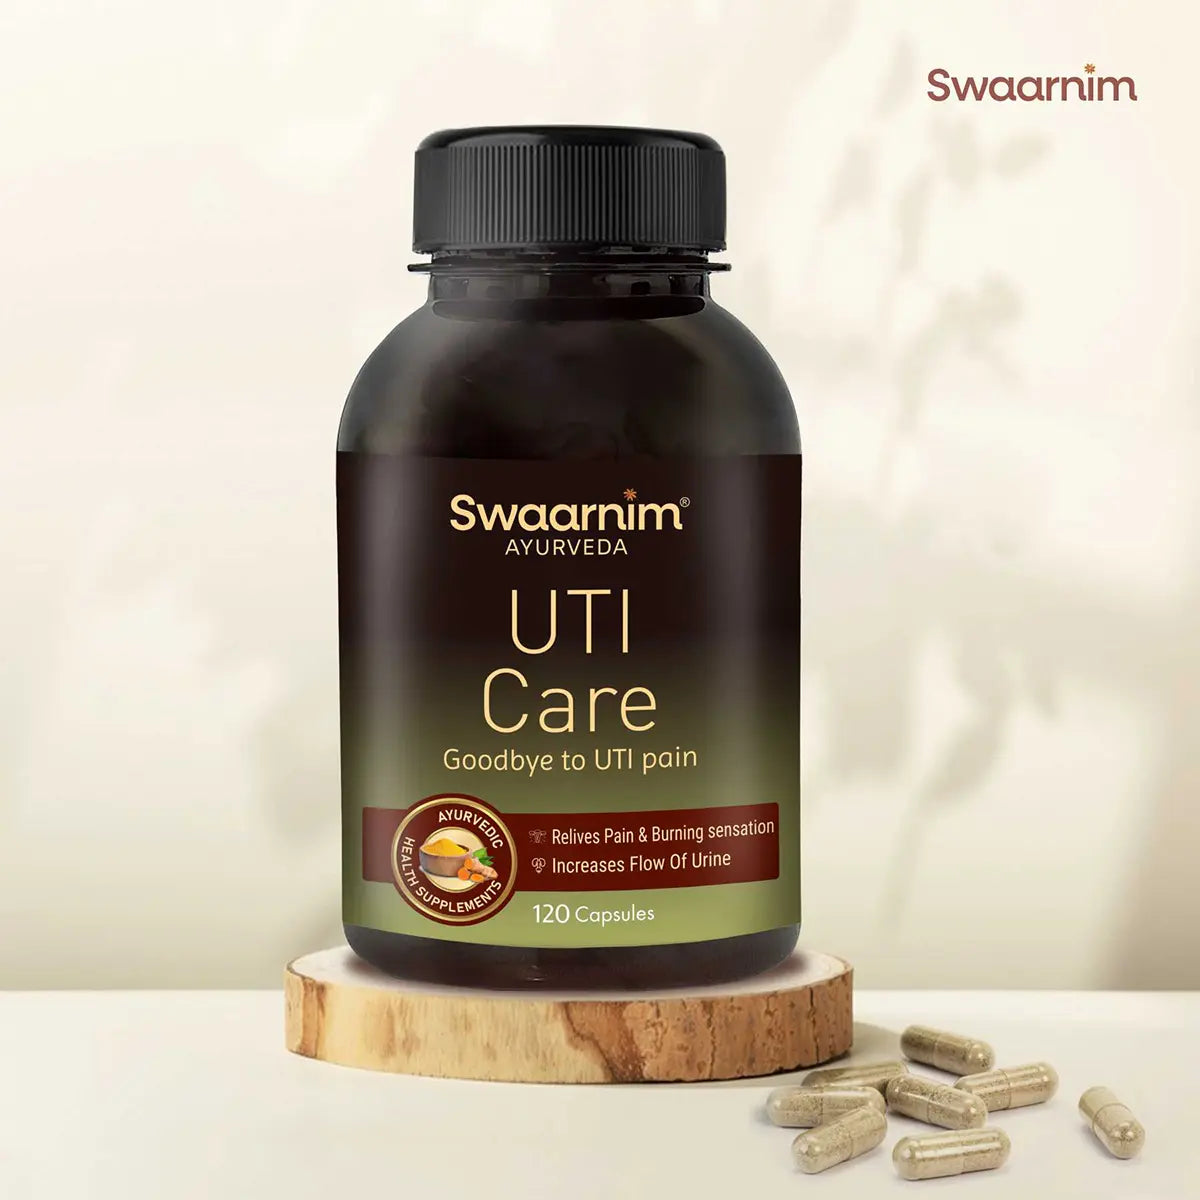 SWAARNIM UTI CARE | Complete relief from burning sensation while urinating Detoxifies the body Manages water in the body